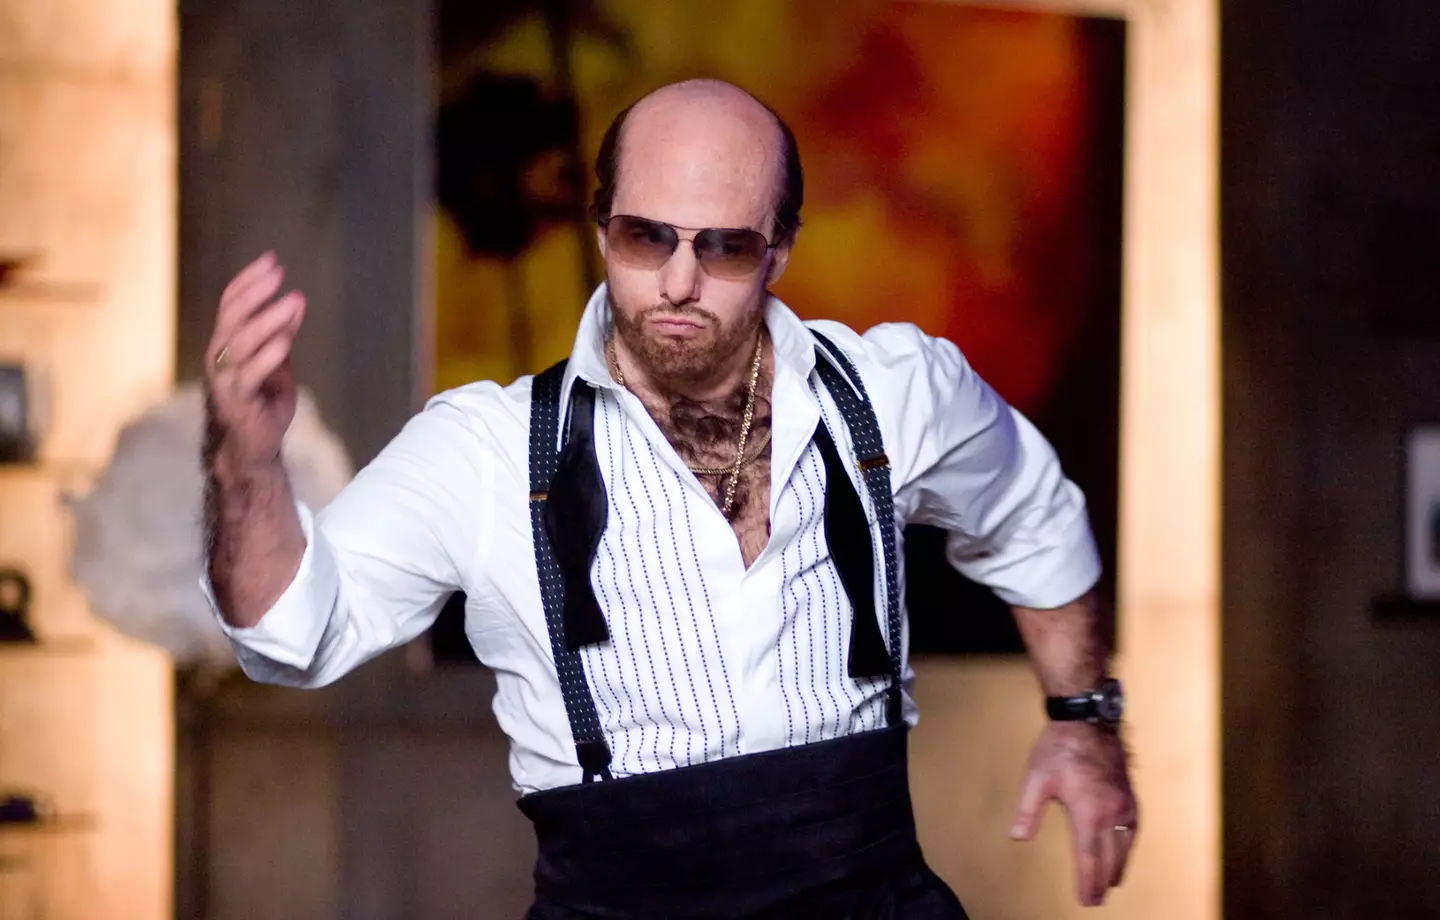 Tom Cruise has revealed whether or not he would reprise his role as Les Grossman in Tropic Thunder.